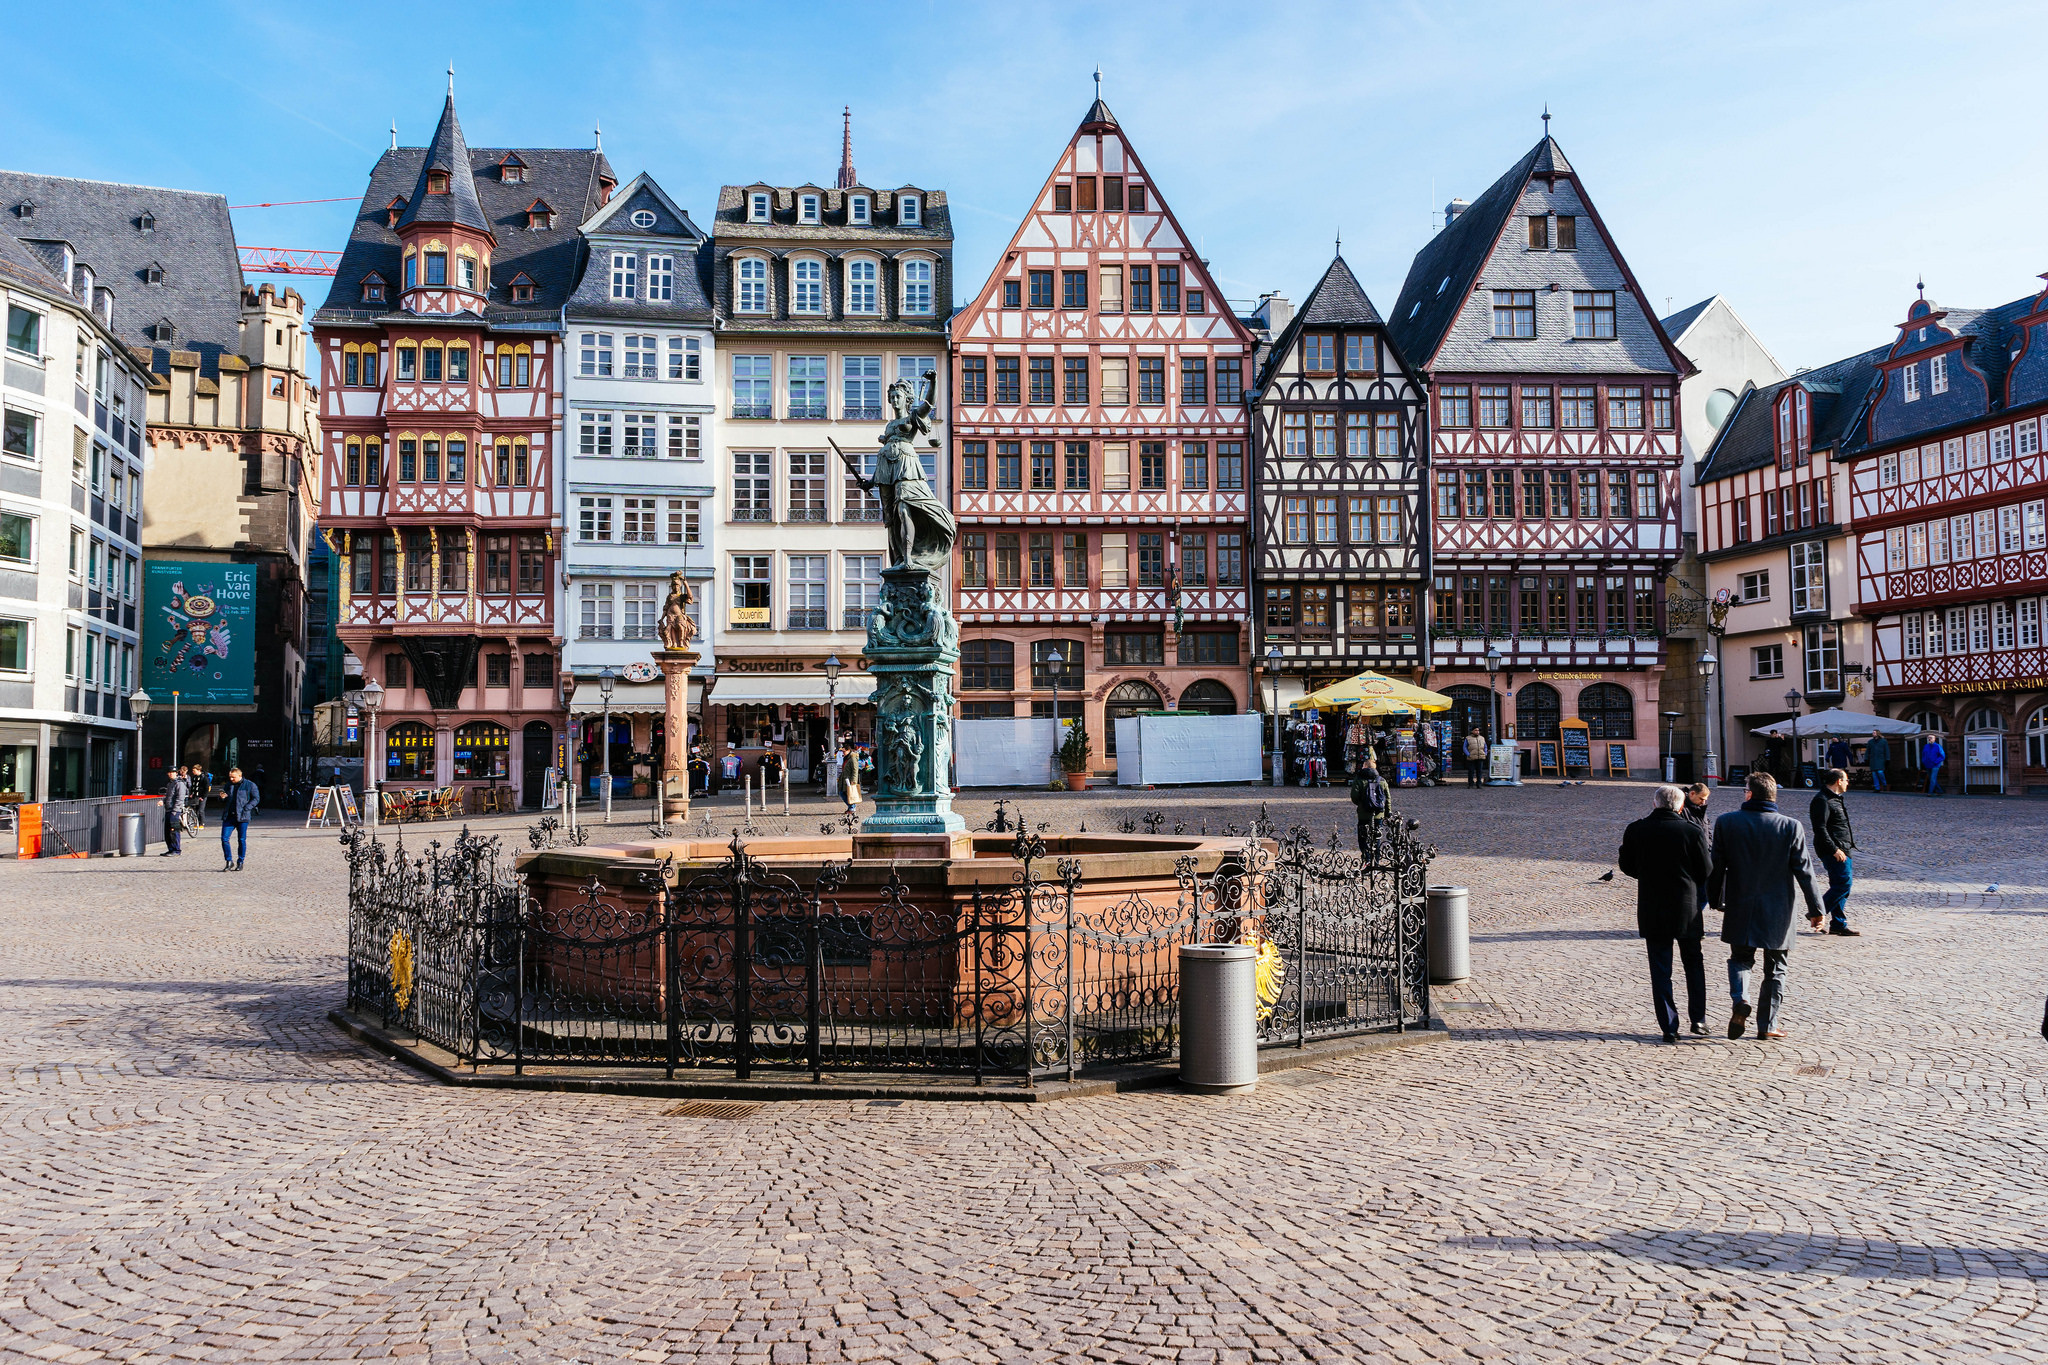 City Square: Lady Justice fountain statue at Romerberg in the old town of Frankfurt, Germany. 2050x1370 HD Wallpaper.